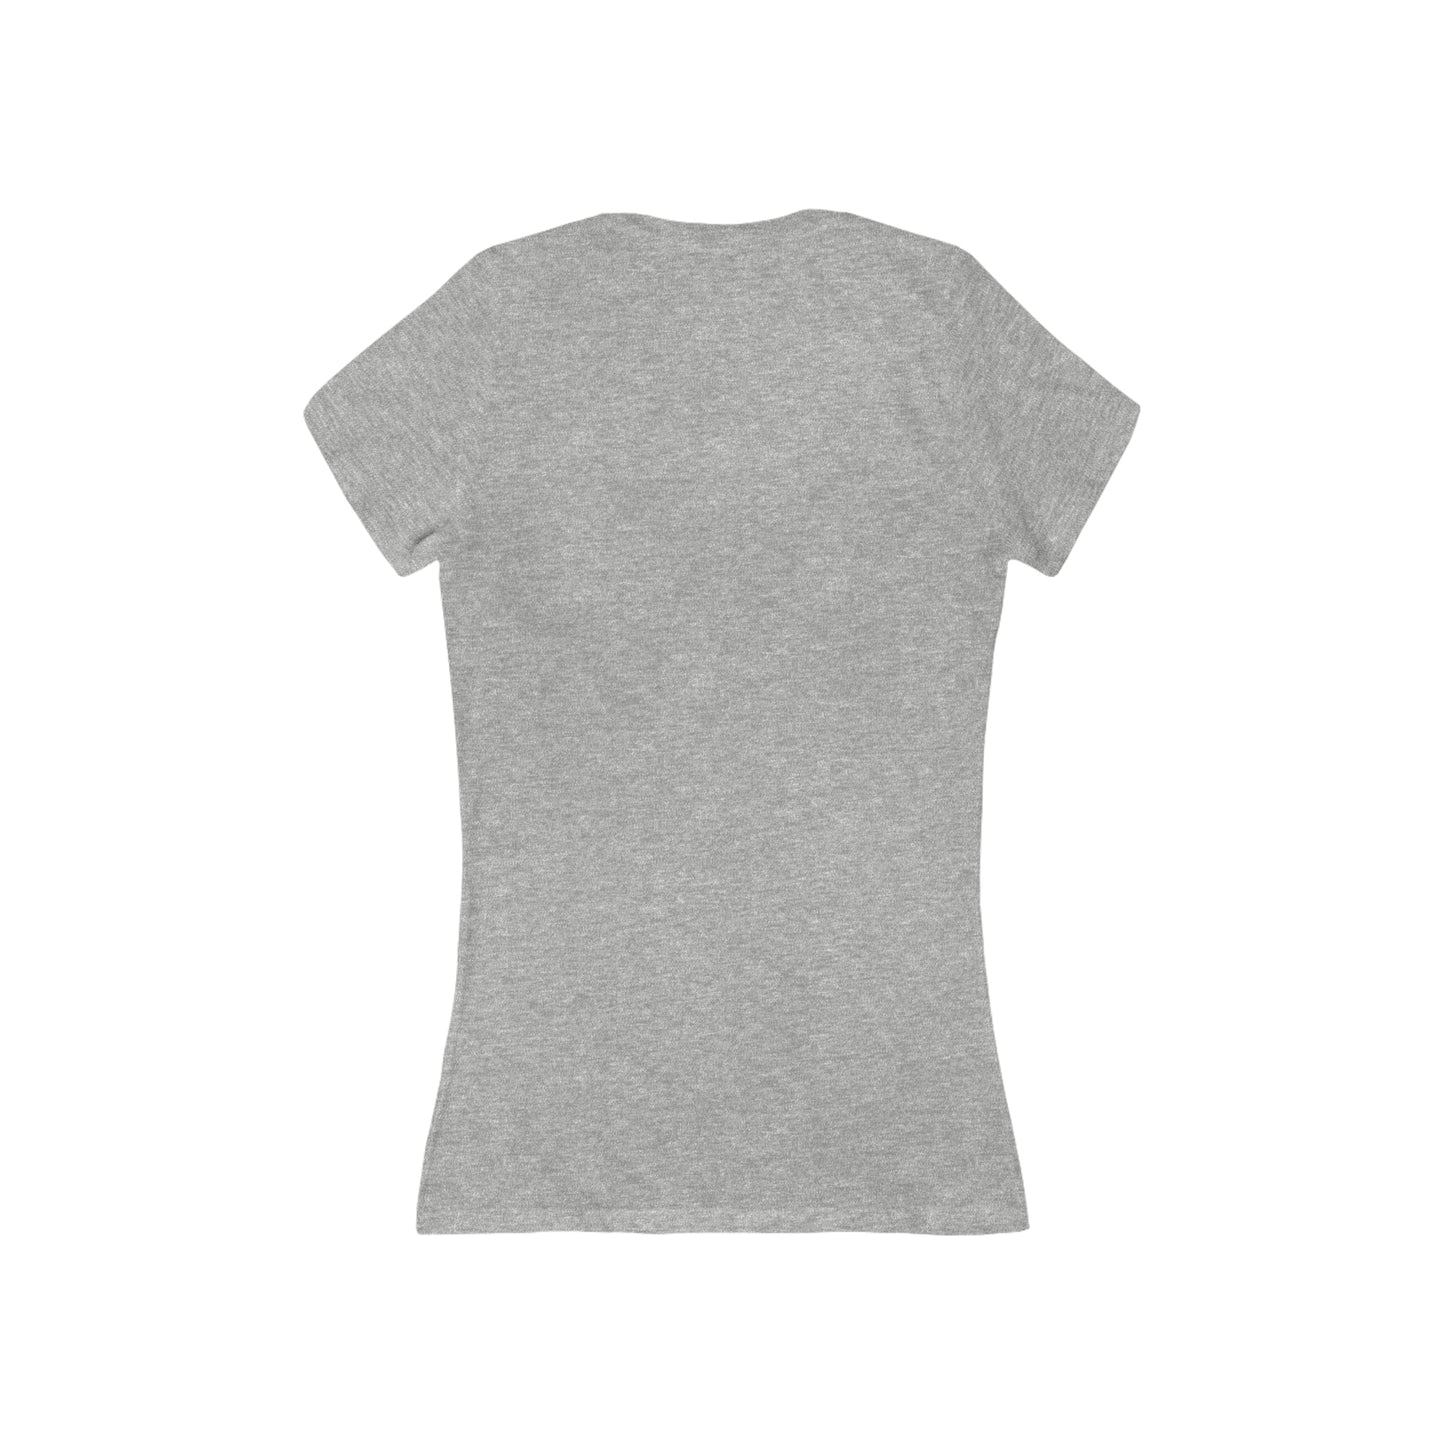 Wish Come True - Fitted Women’s V-Neck